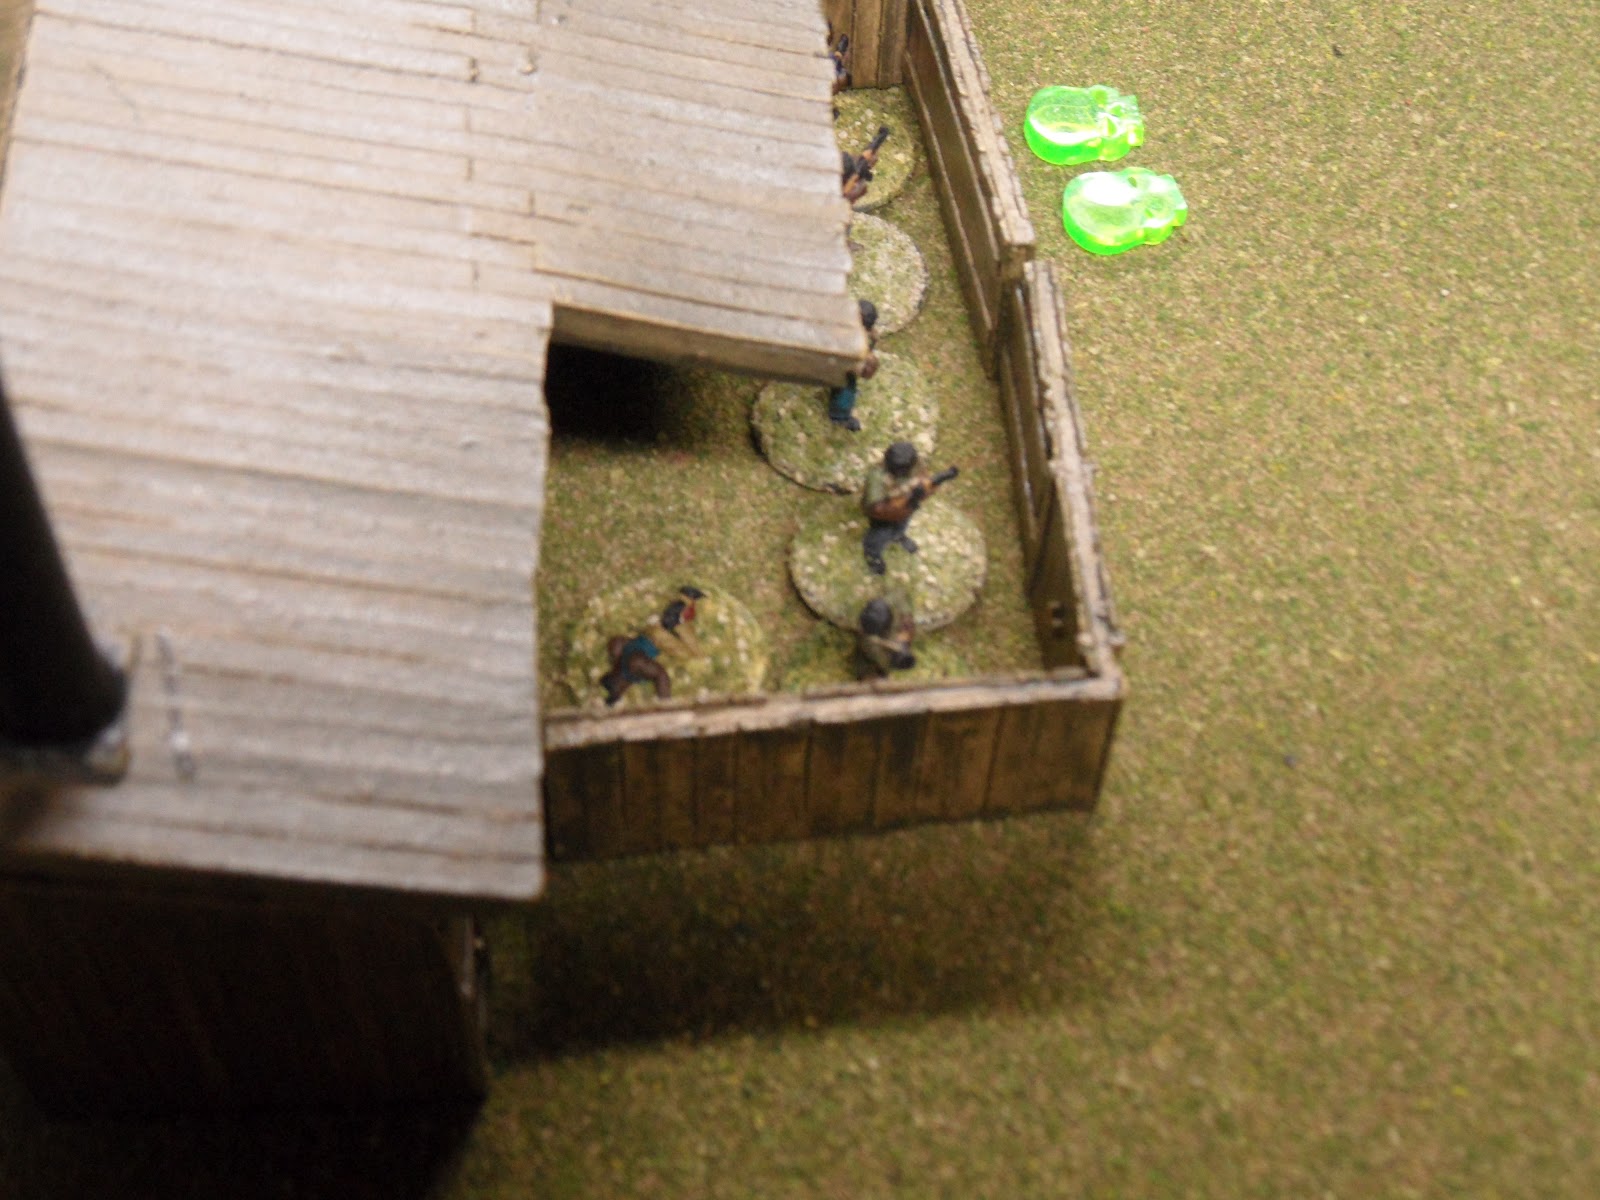  Back at the sawmill, the IMC forces maintain their foothold despite casualties. 